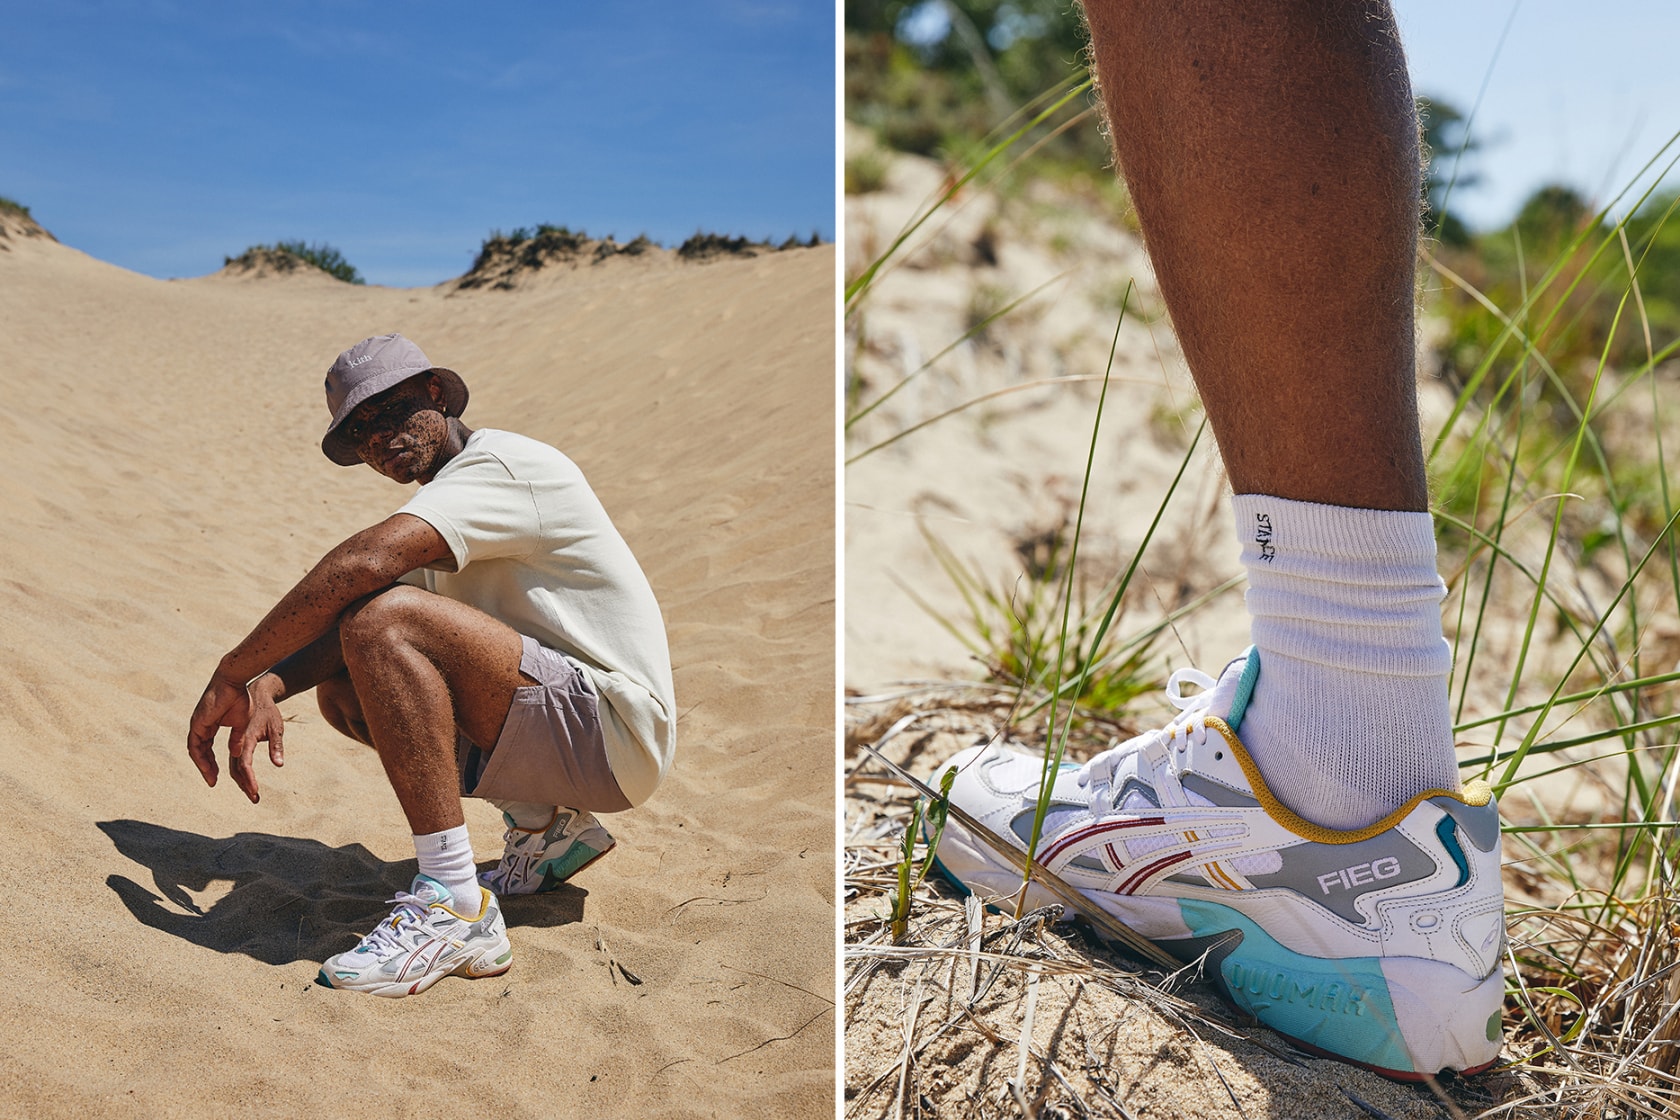 kith asics gel kayano 5 collab sneakers apparel accessories